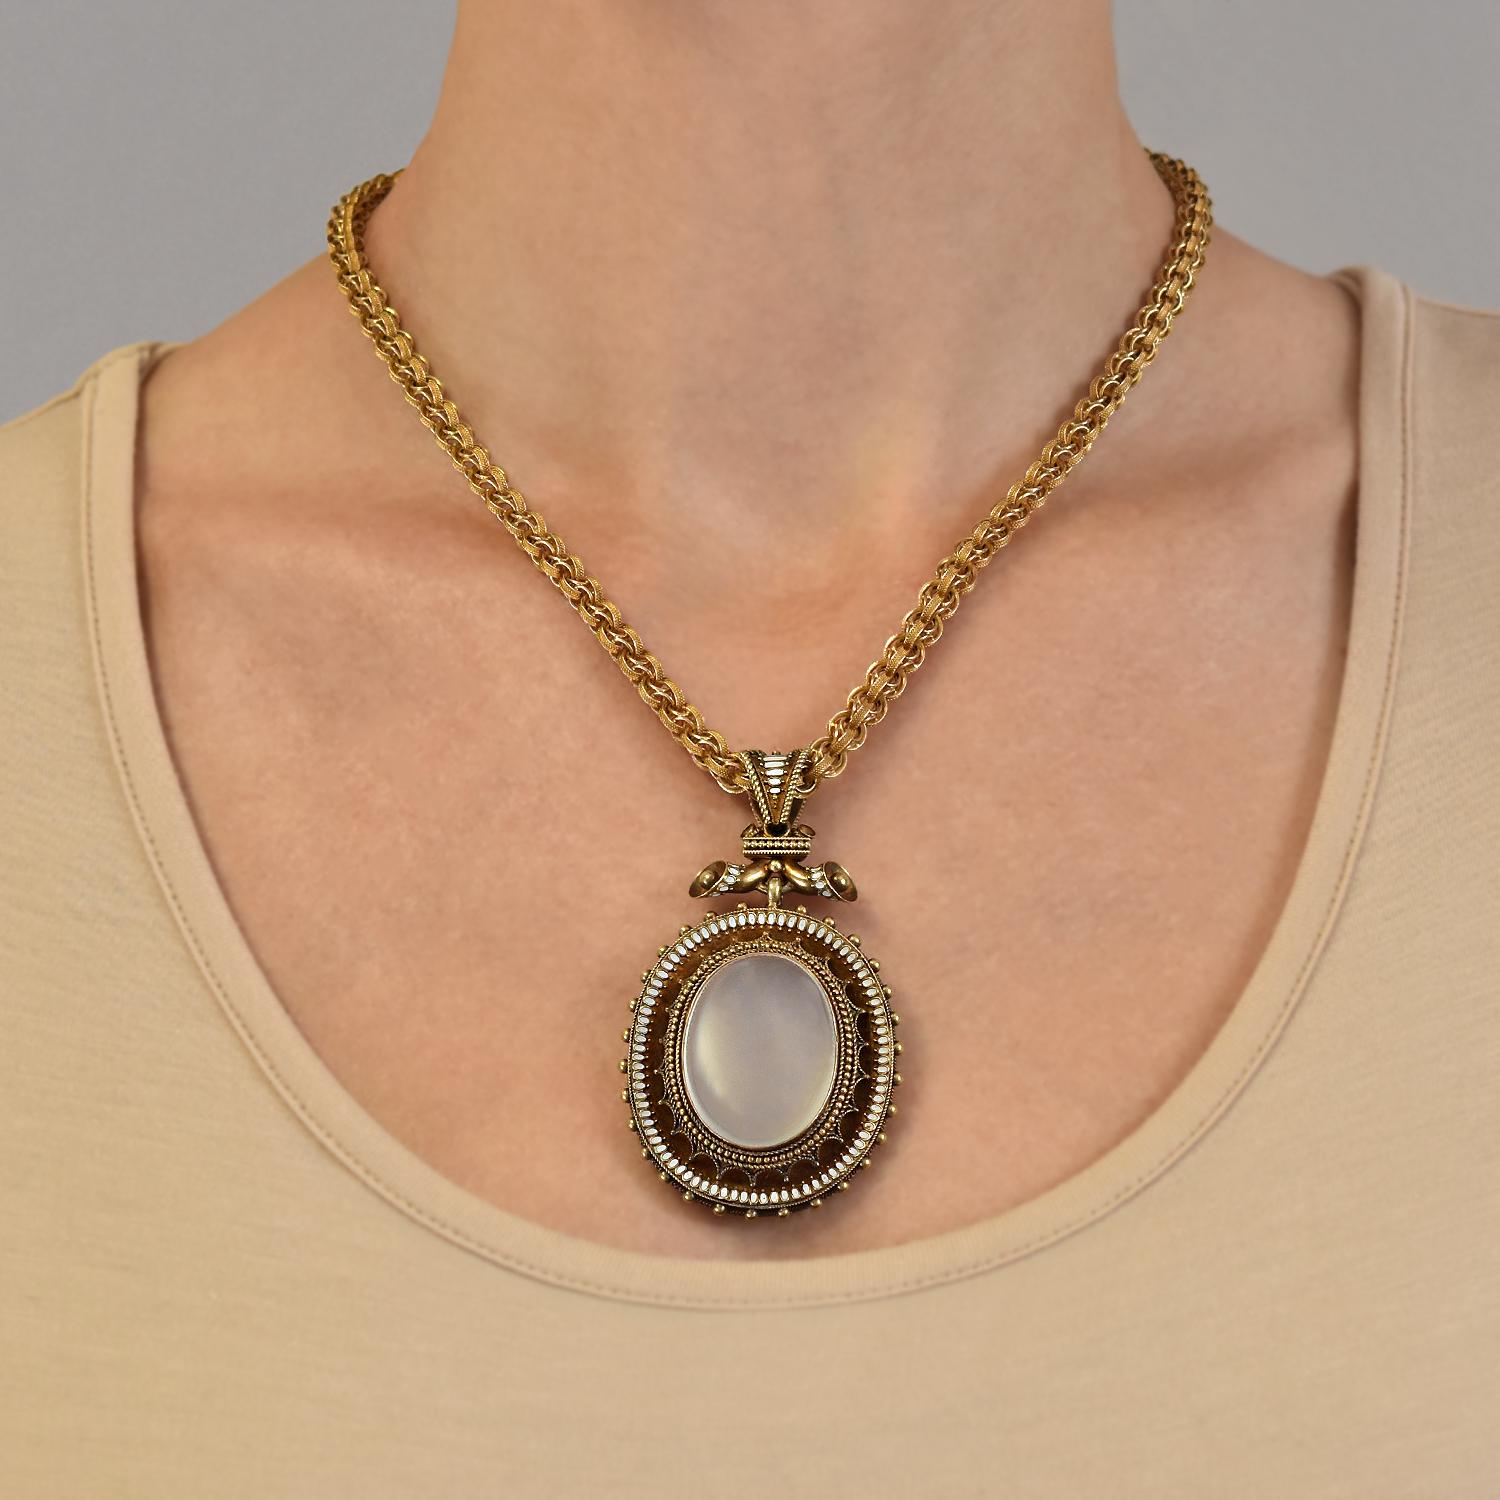 Victorian Large 18 Karat Enameled and Moonstone Pendant Necklace In Good Condition For Sale In Narberth, PA